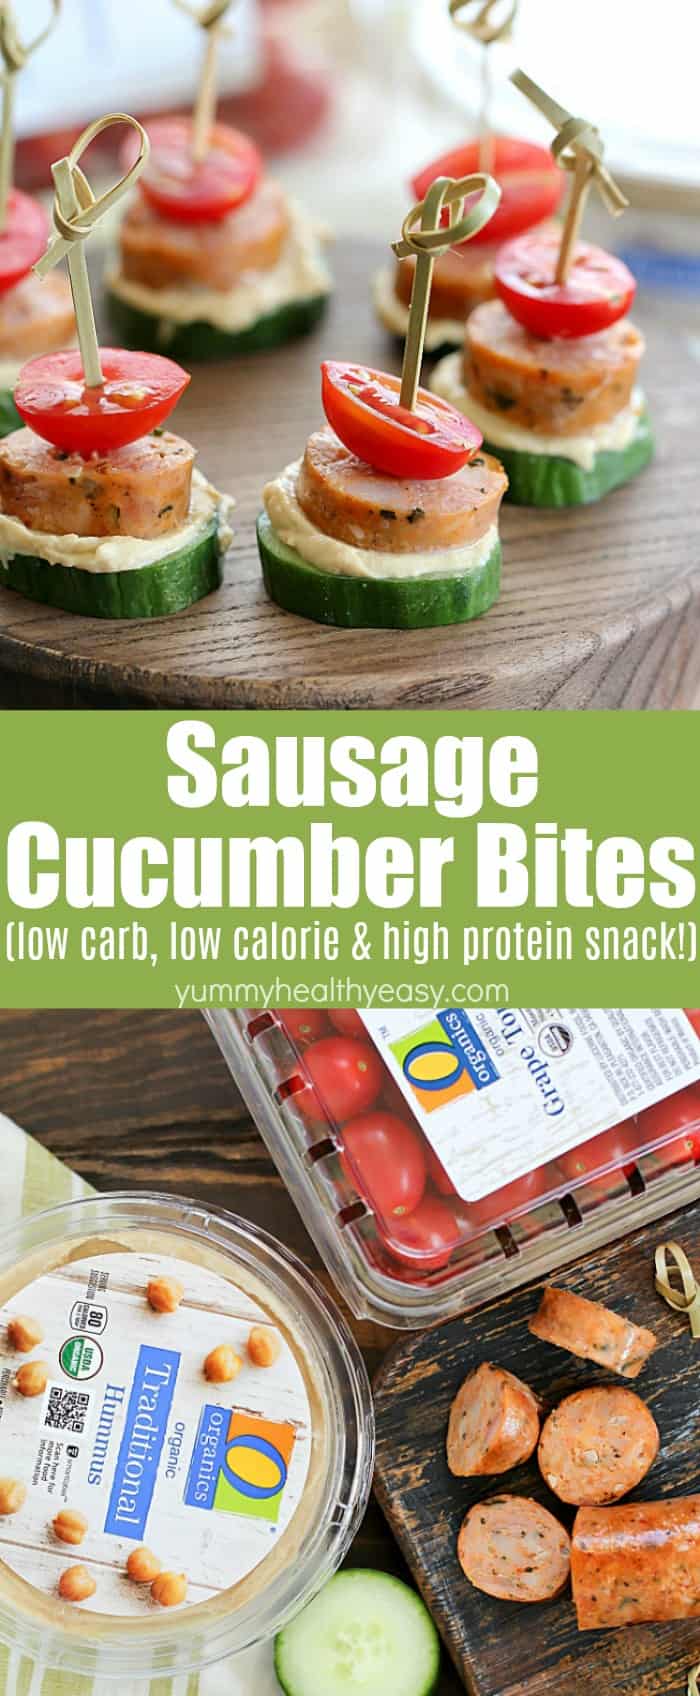 Looking for a delicious snack that's healthy, too? Try these Sausage Cucumber Bites! Fun to make and fun to eat! Your kids will love helping you put these together! They're low carb, low calorie, and high protein! The perfect after school snack! #ad #lowcarb #lowcalorie #highprotein #snack #recipe #yummy #healthy #easy #delicious